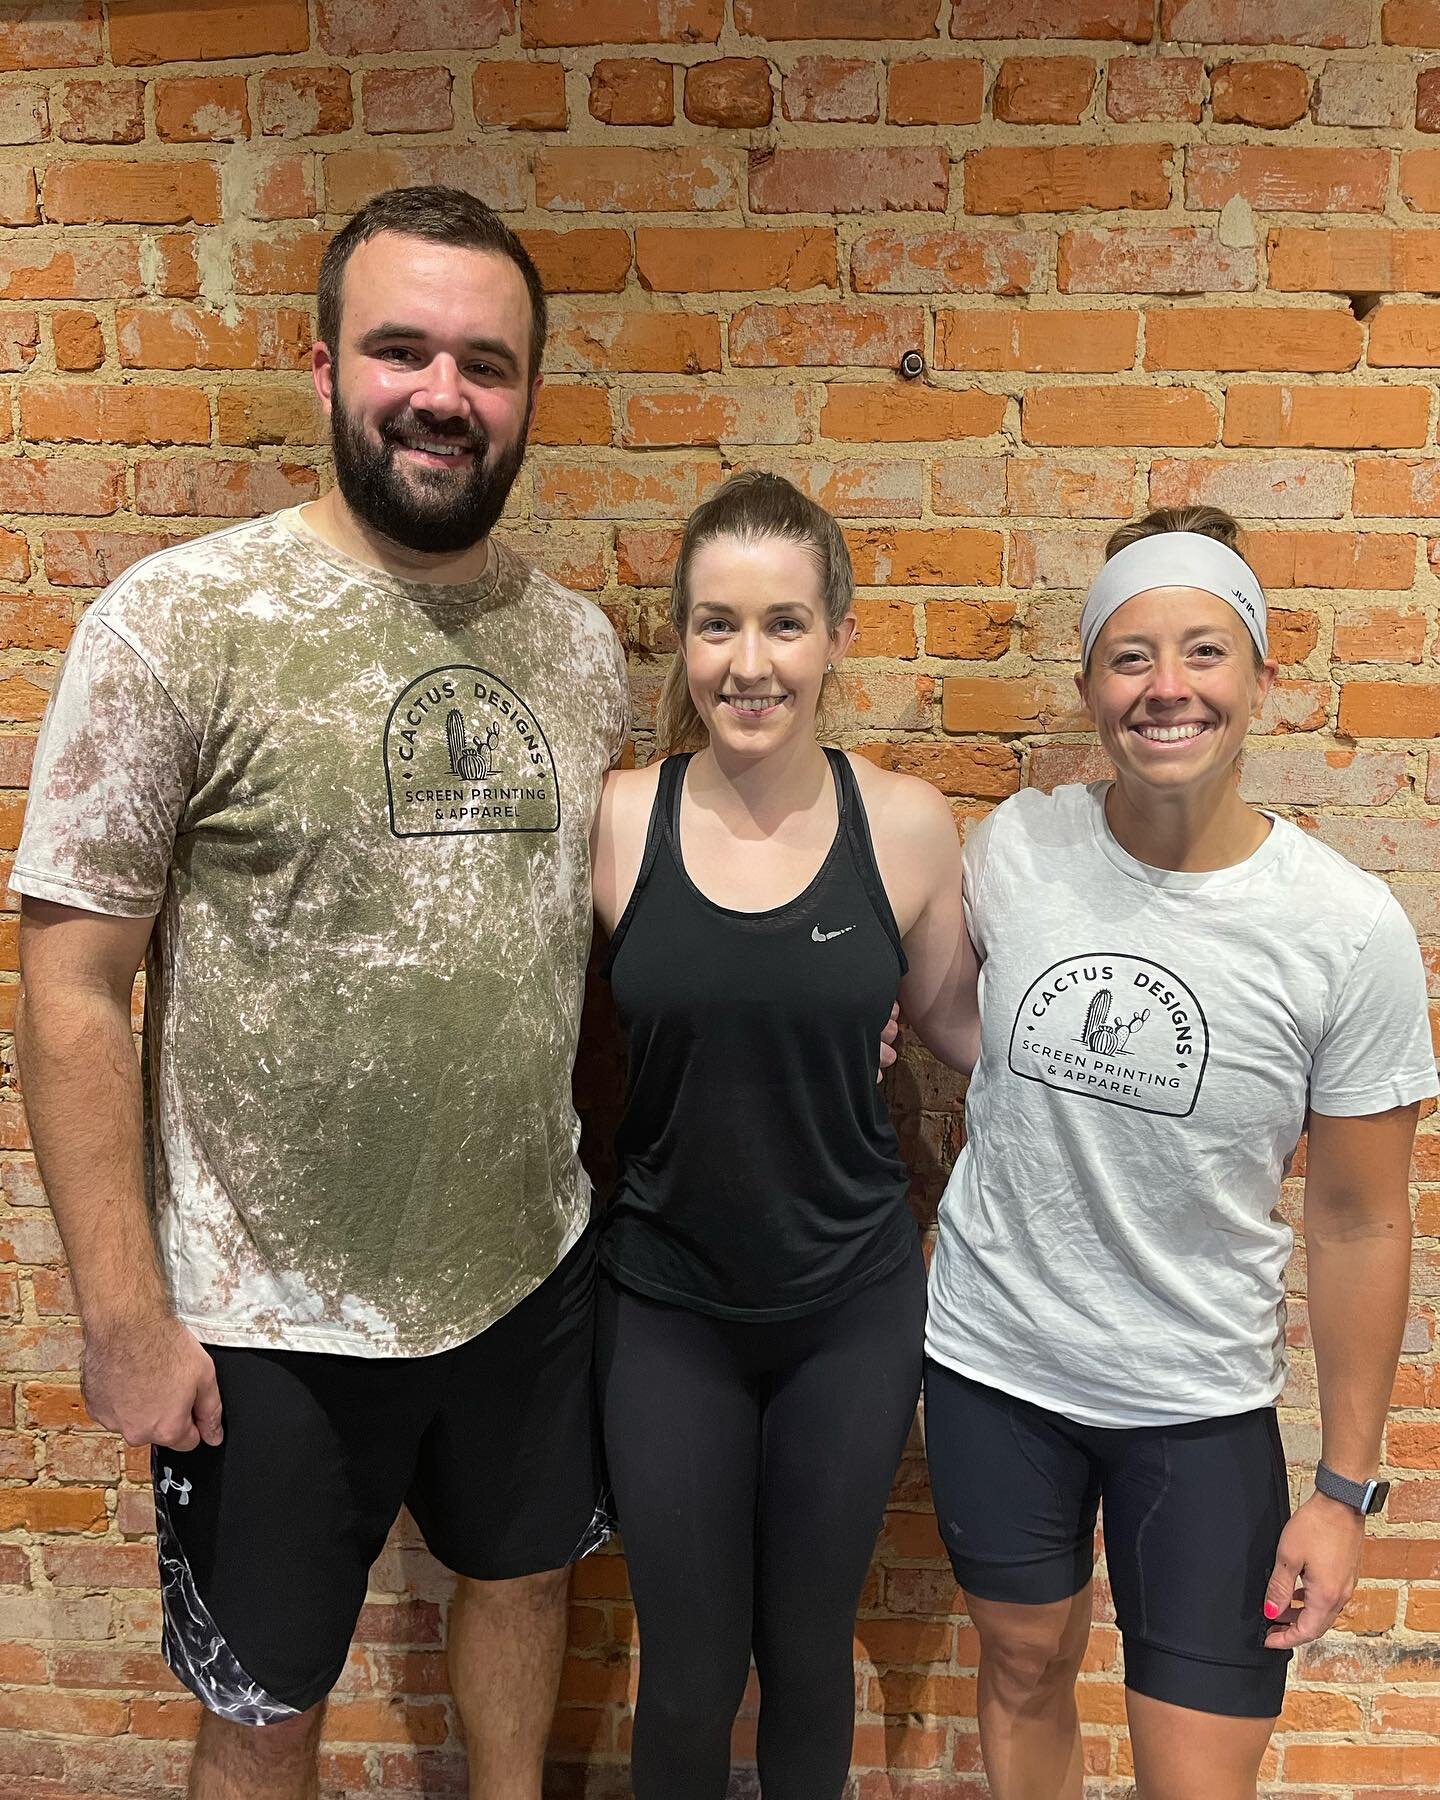 Small businesses supporting other small businesses&hellip;

We&rsquo;re all about it!

Fuquay fam- go check out @rebel.cycle.nc for your daily sweat sesh! Knowledgeable instructors, great music, AC, and only $10 to drop-in 🚴&zwj;♀️